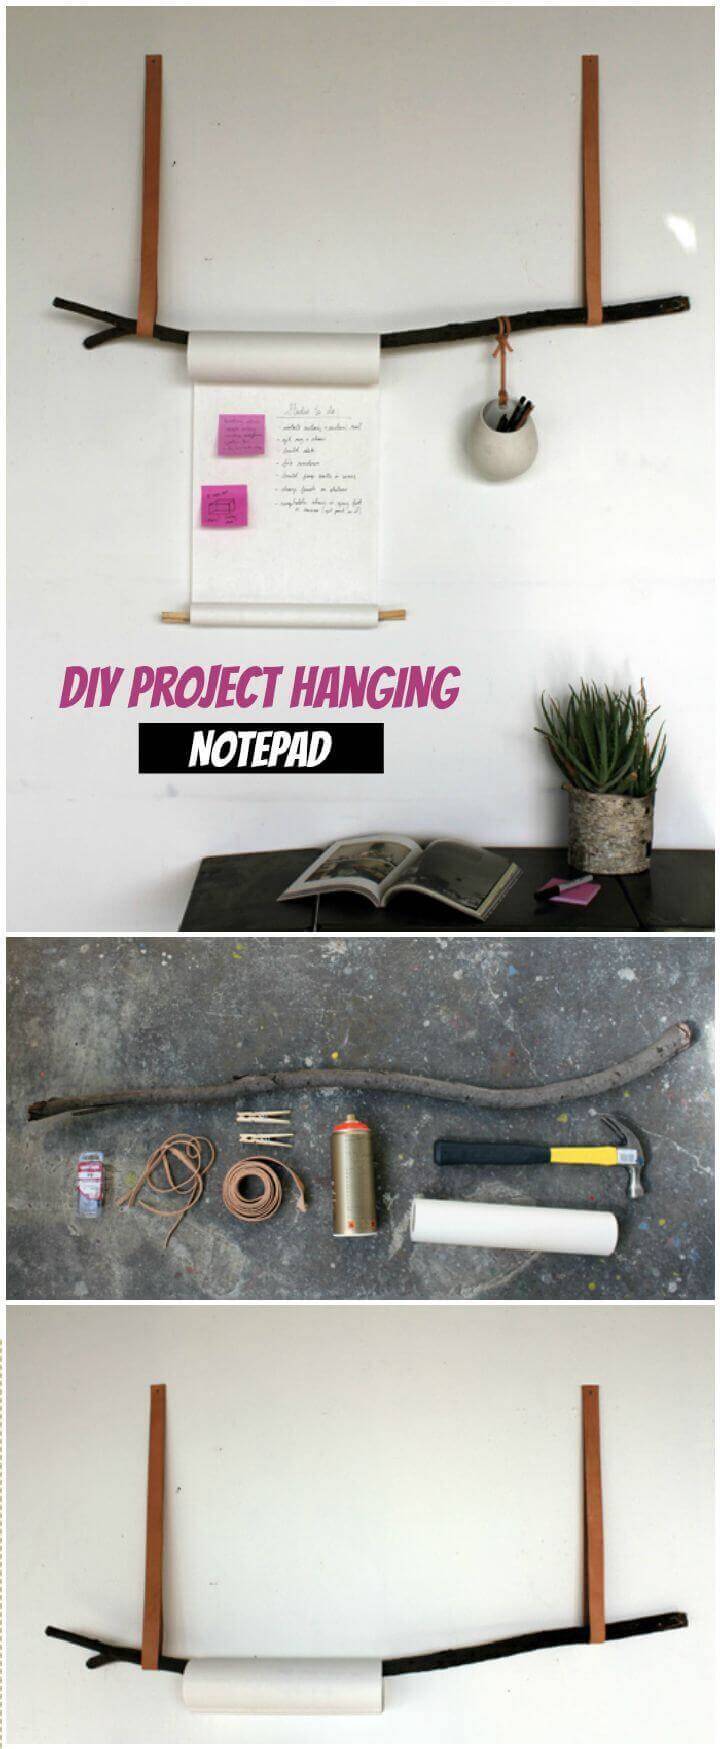 DIY Project Hanging Notepad